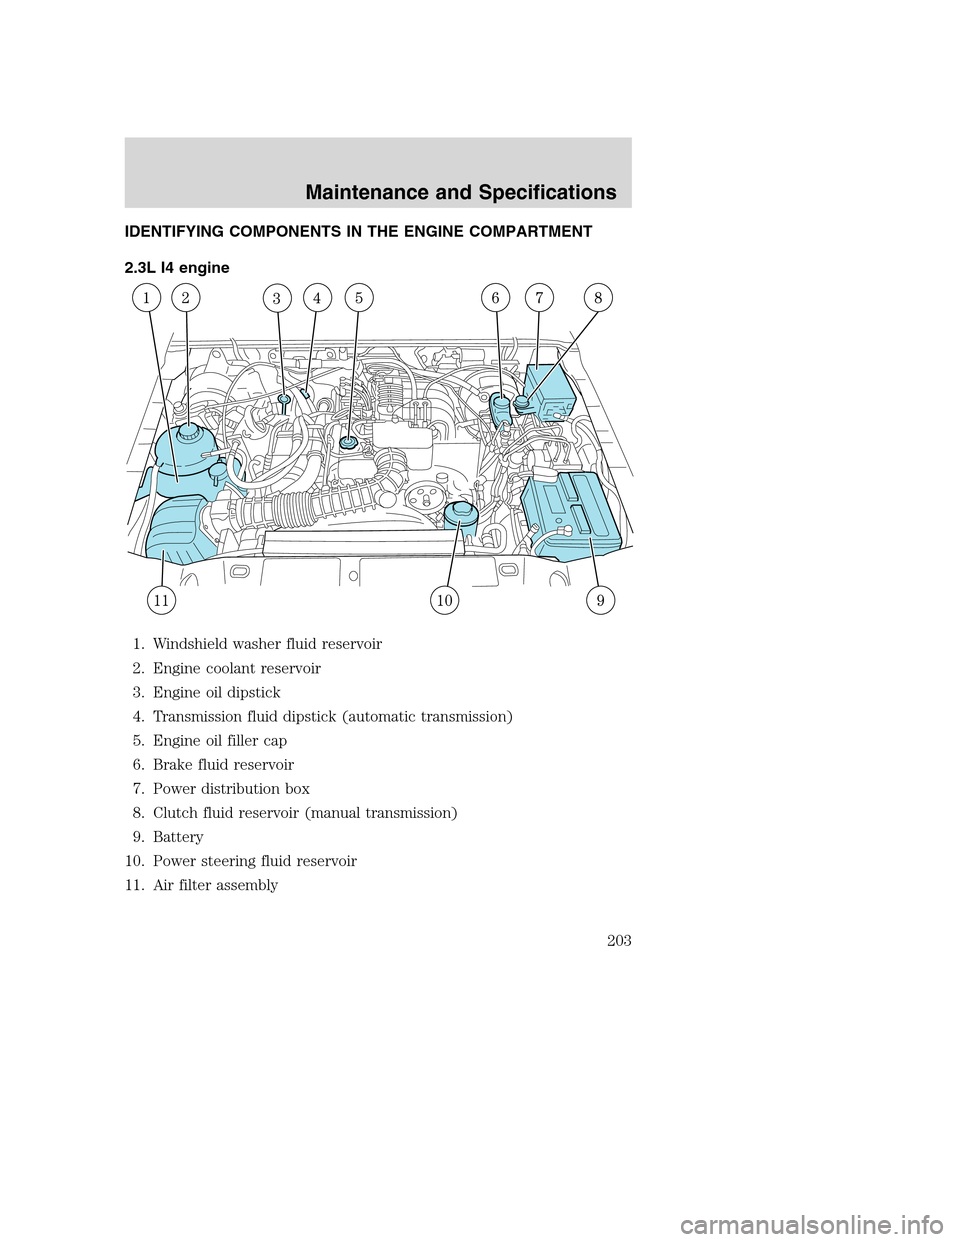 MAZDA MODEL B-SERIES 2005  Owners Manual (in English) IDENTIFYING COMPONENTS IN THE ENGINE COMPARTMENT
2.3L I4 engine
1. Windshield washer fluid reservoir
2. Engine coolant reservoir
3. Engine oil dipstick
4. Transmission fluid dipstick (automatic transm